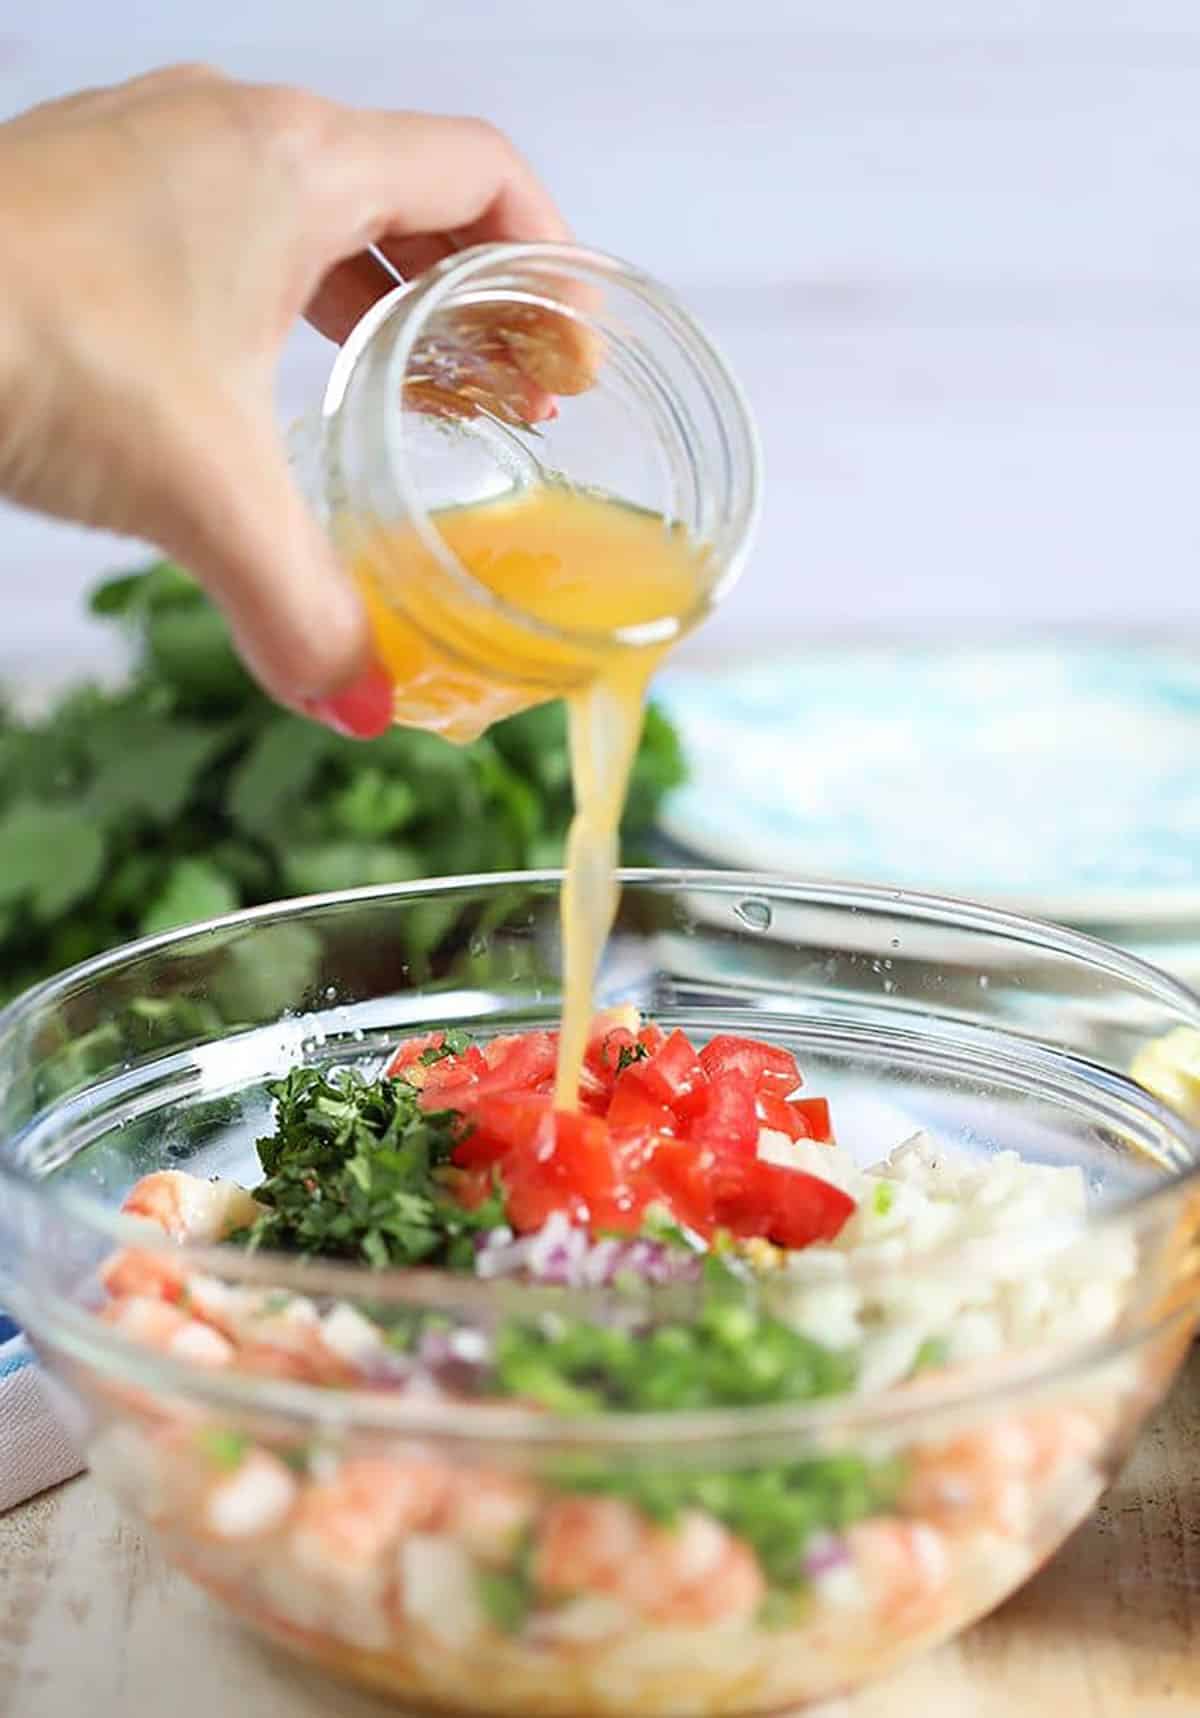 Ingredients for Shrimp Ceviche in a glass bowl with dressing being poured.